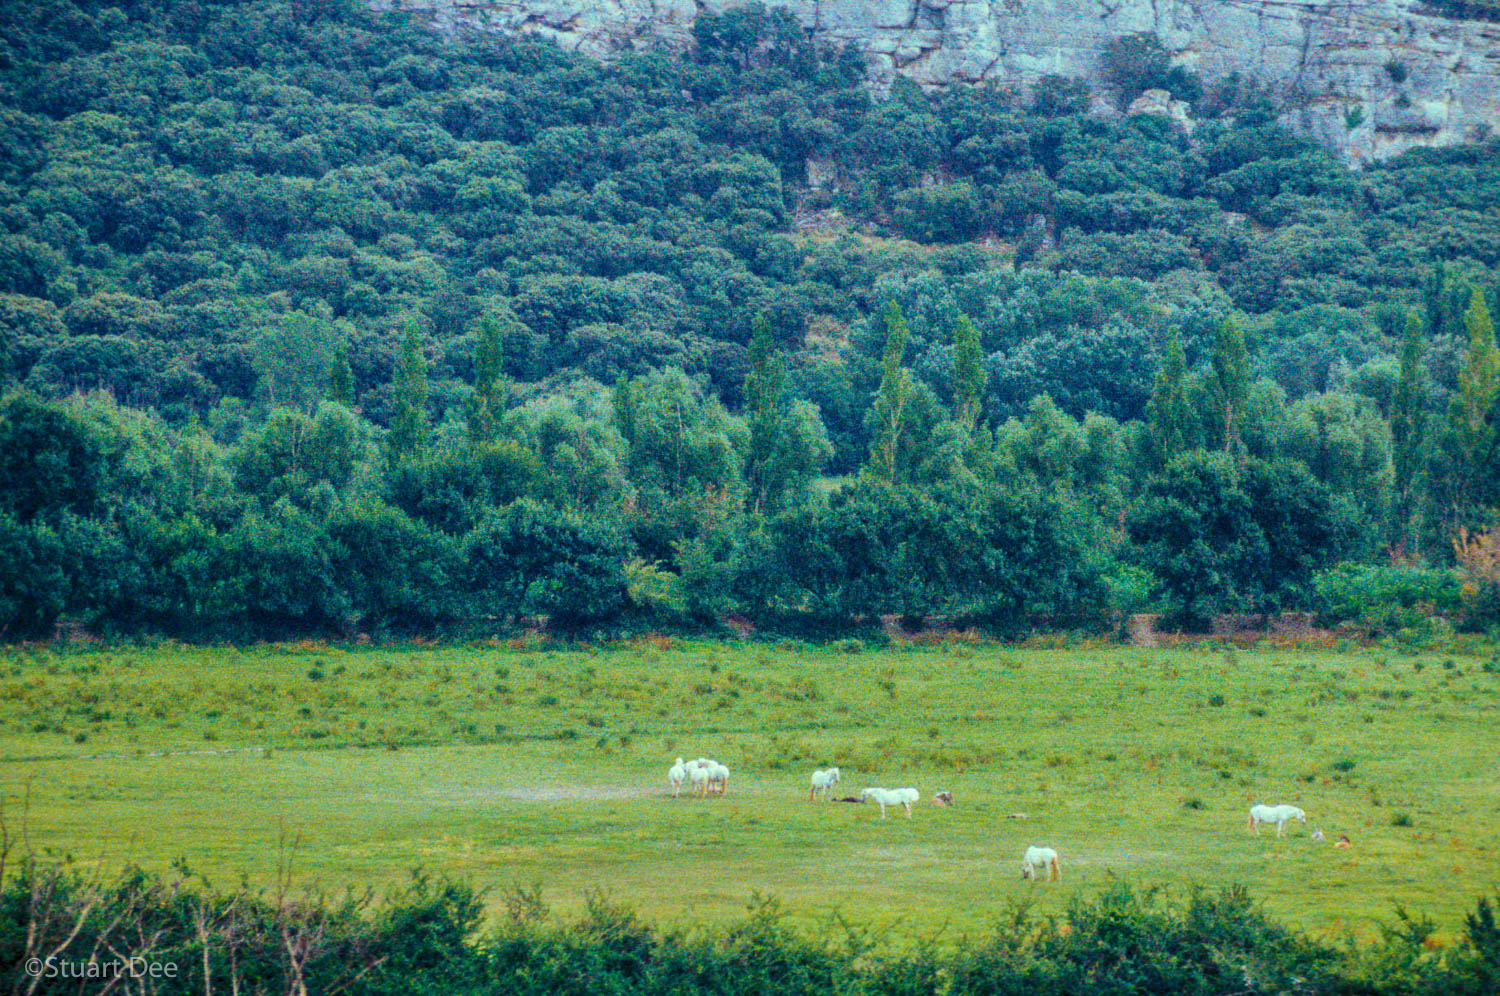  White Horses In Field, Provence, France 